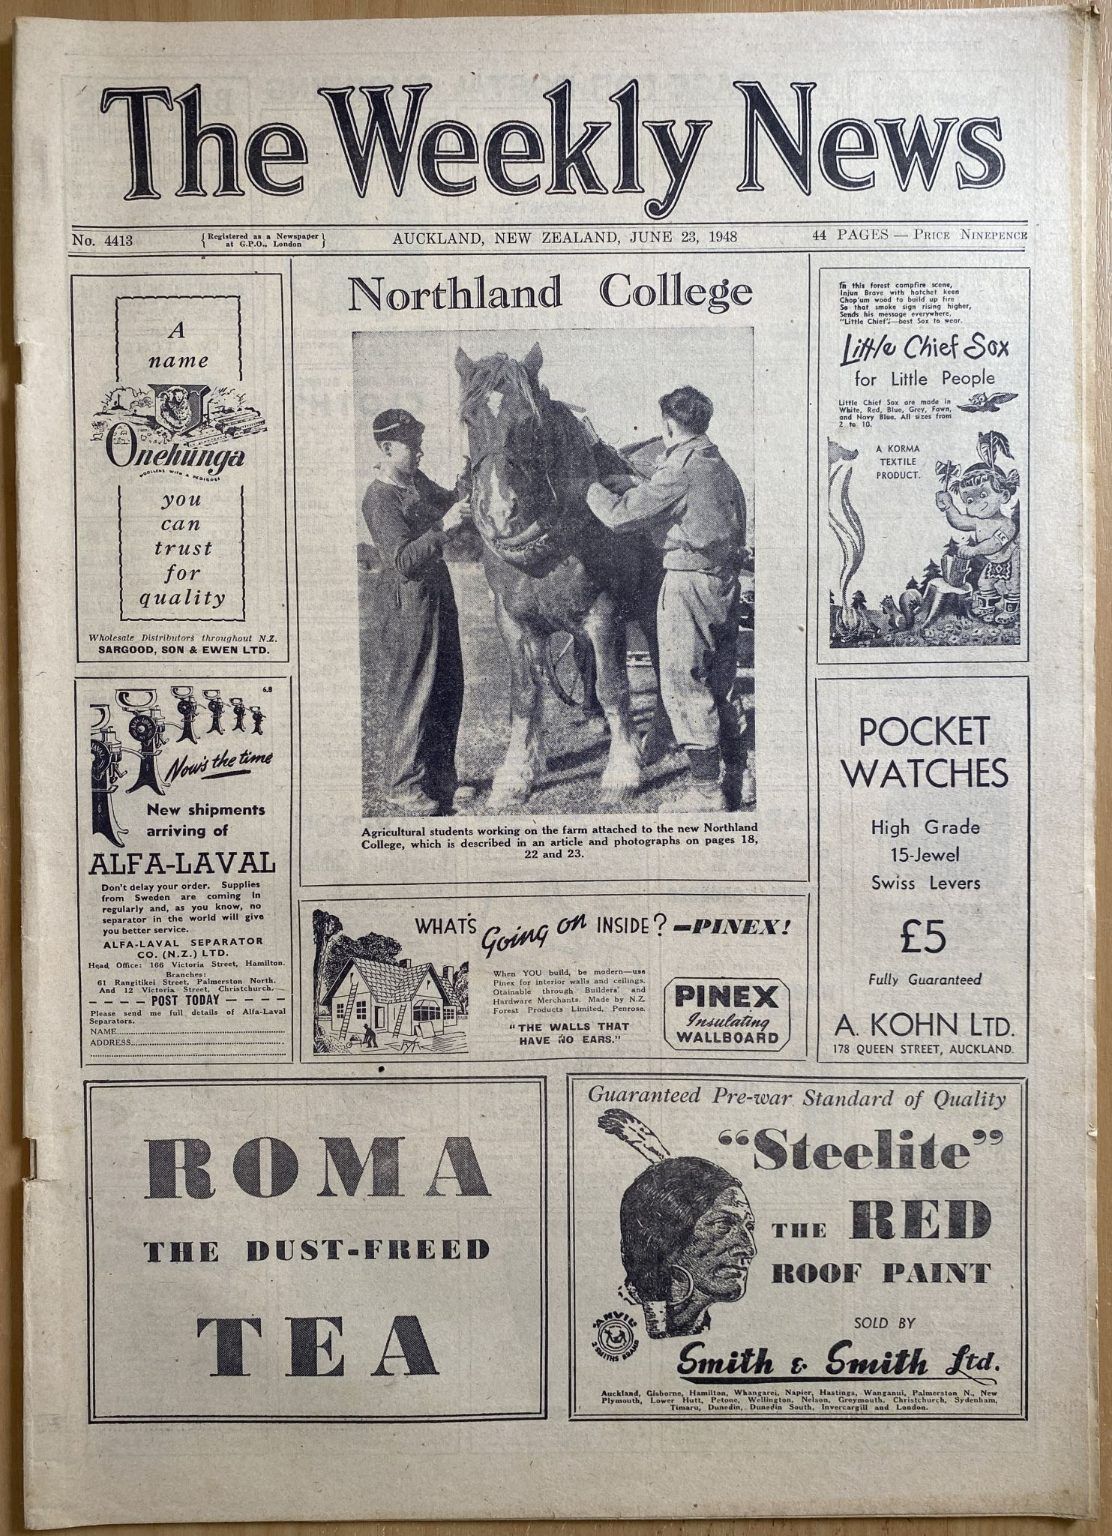 OLD NEWSPAPER: The Weekly News - No. 4413, 23 June 1948